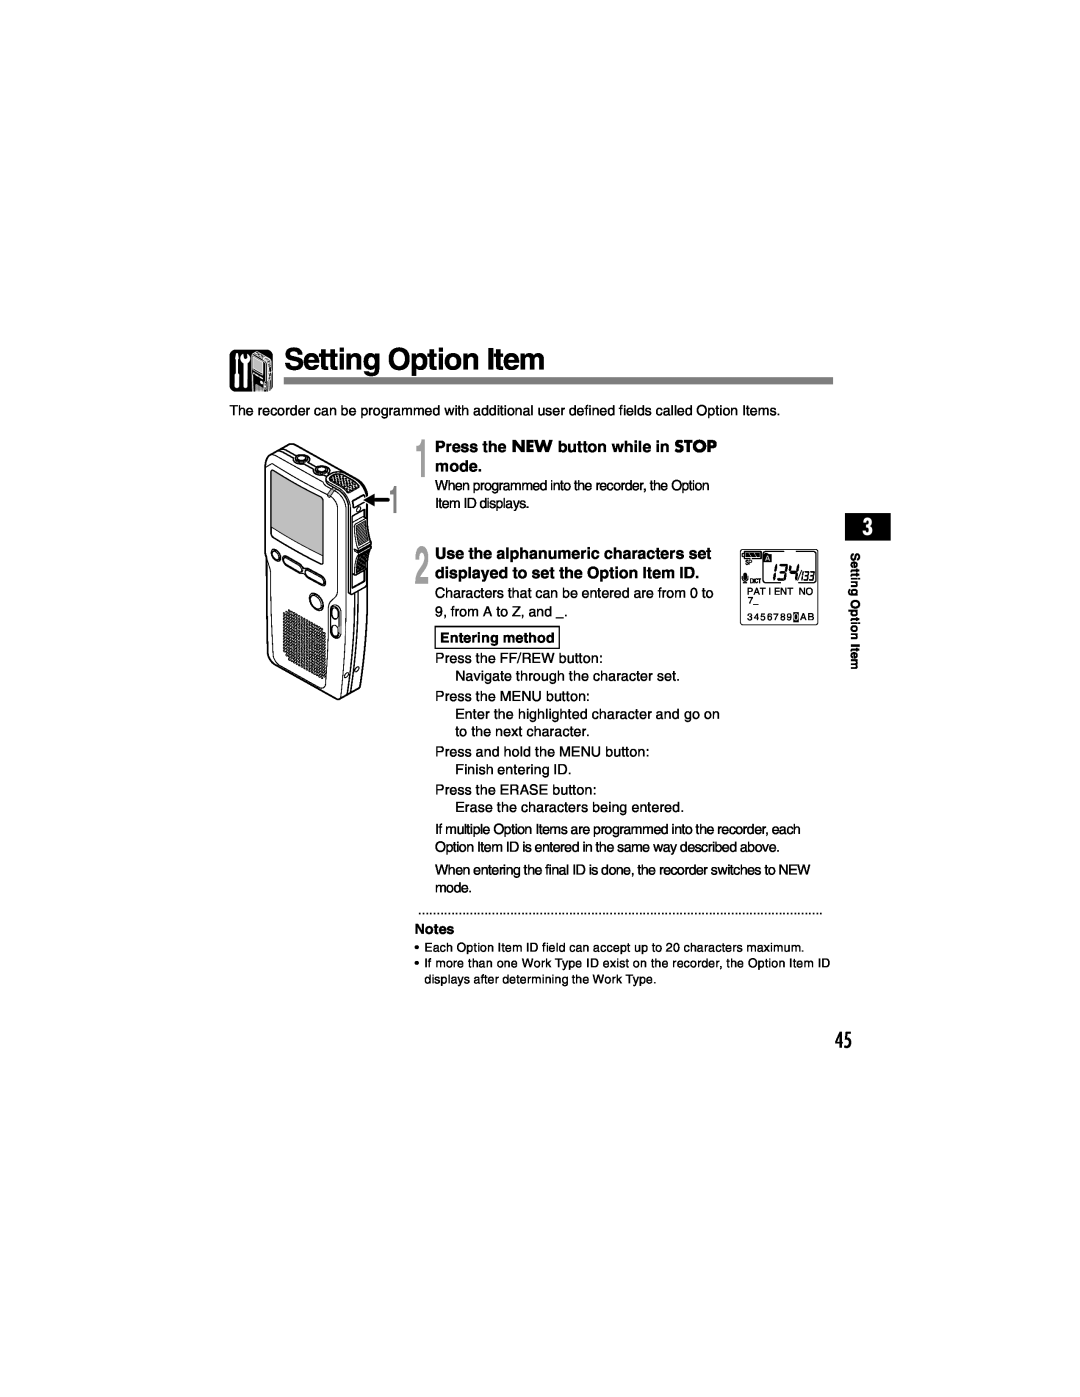 Olympus DS-4000 manual Setting Option Item, Press the NEW button while in STOP mode, Entering method 